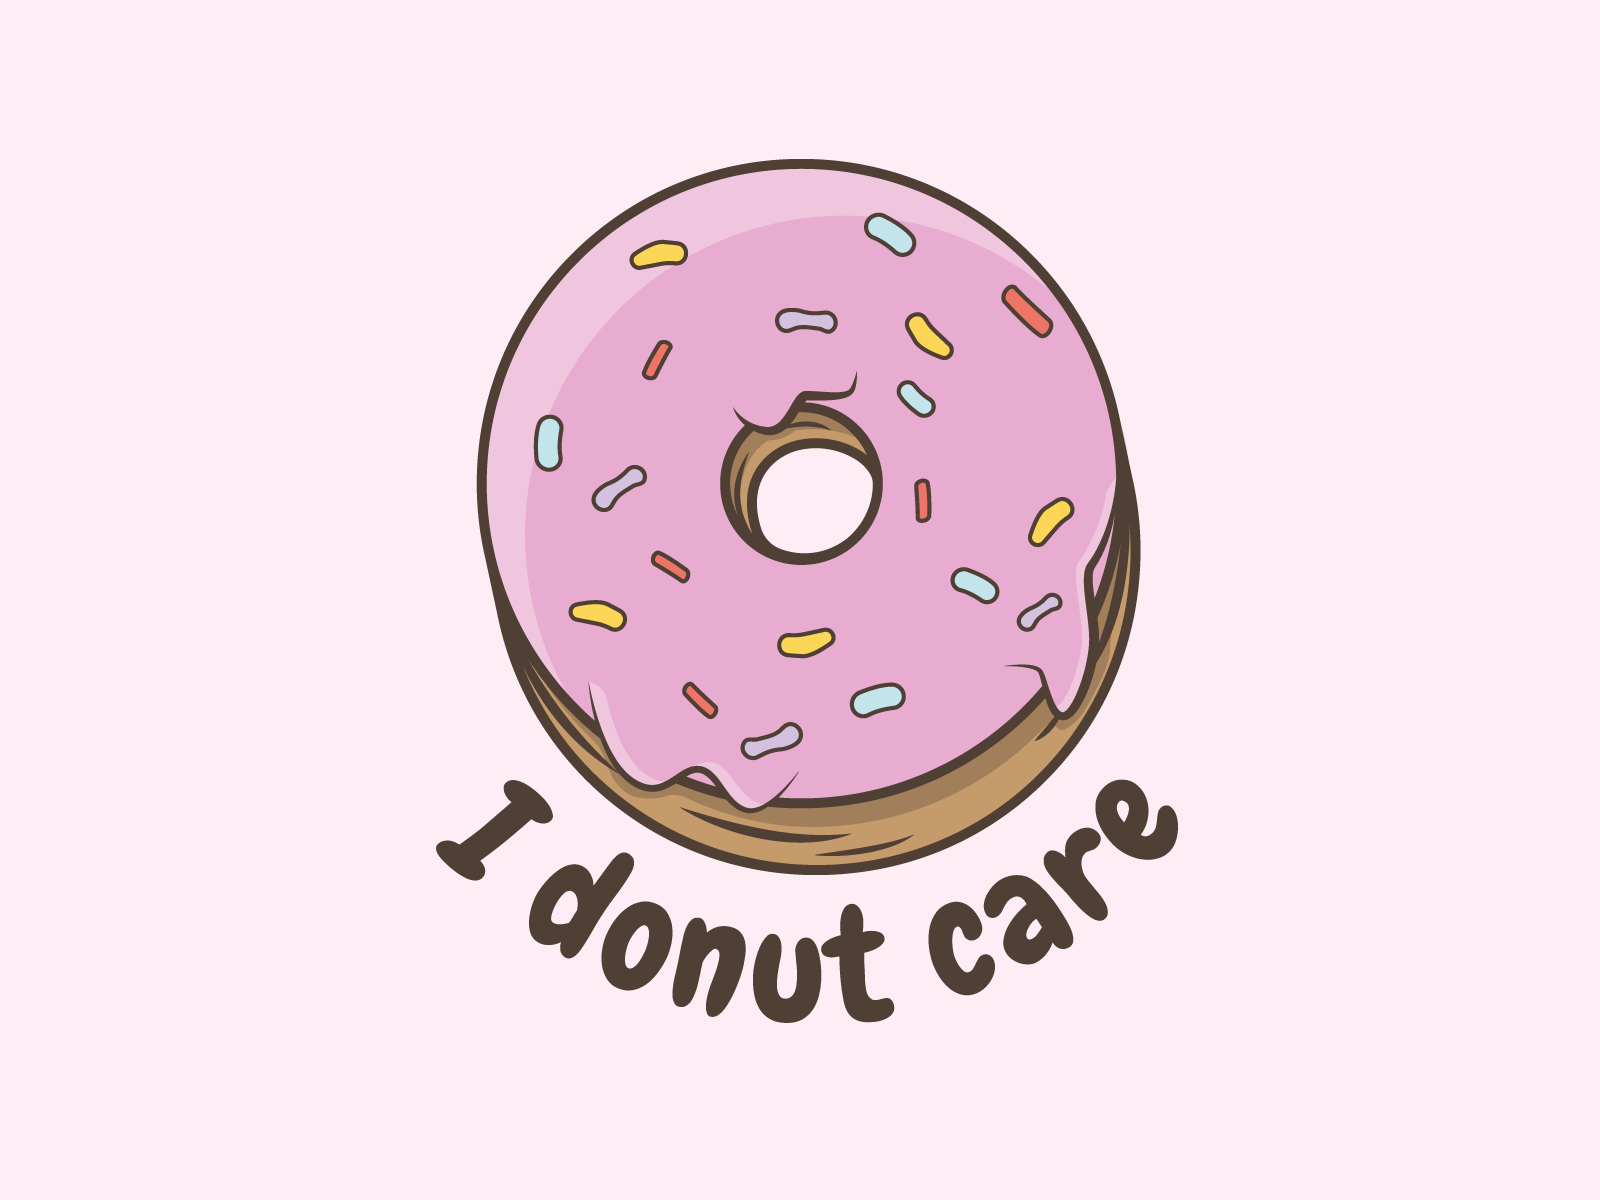 Cute donut | I donut care by Roxanne on Dribbble